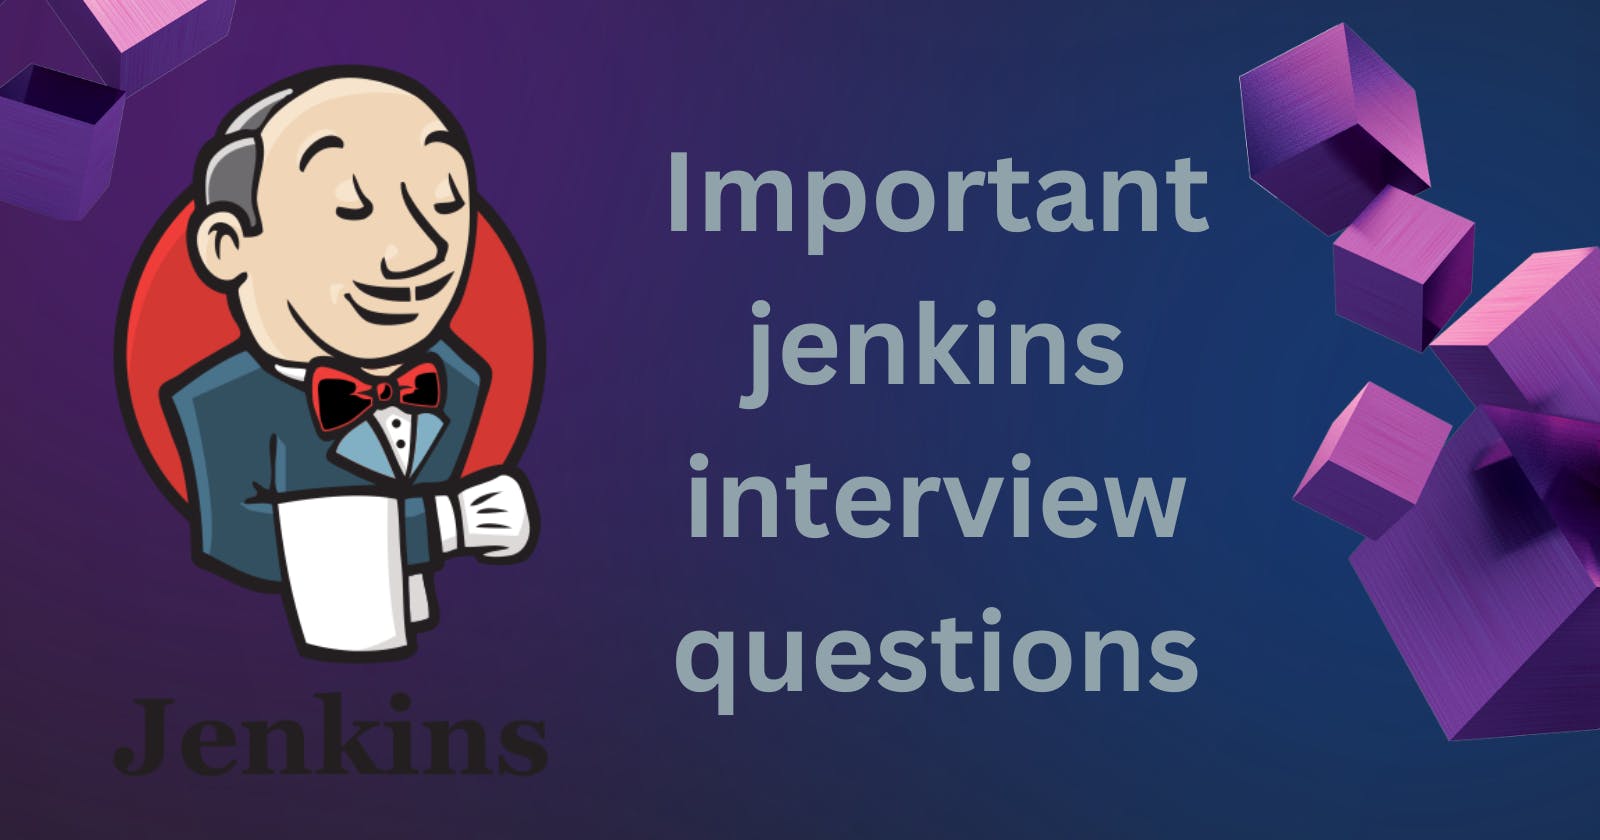 Day 29: Jenkins Important Interview Questions